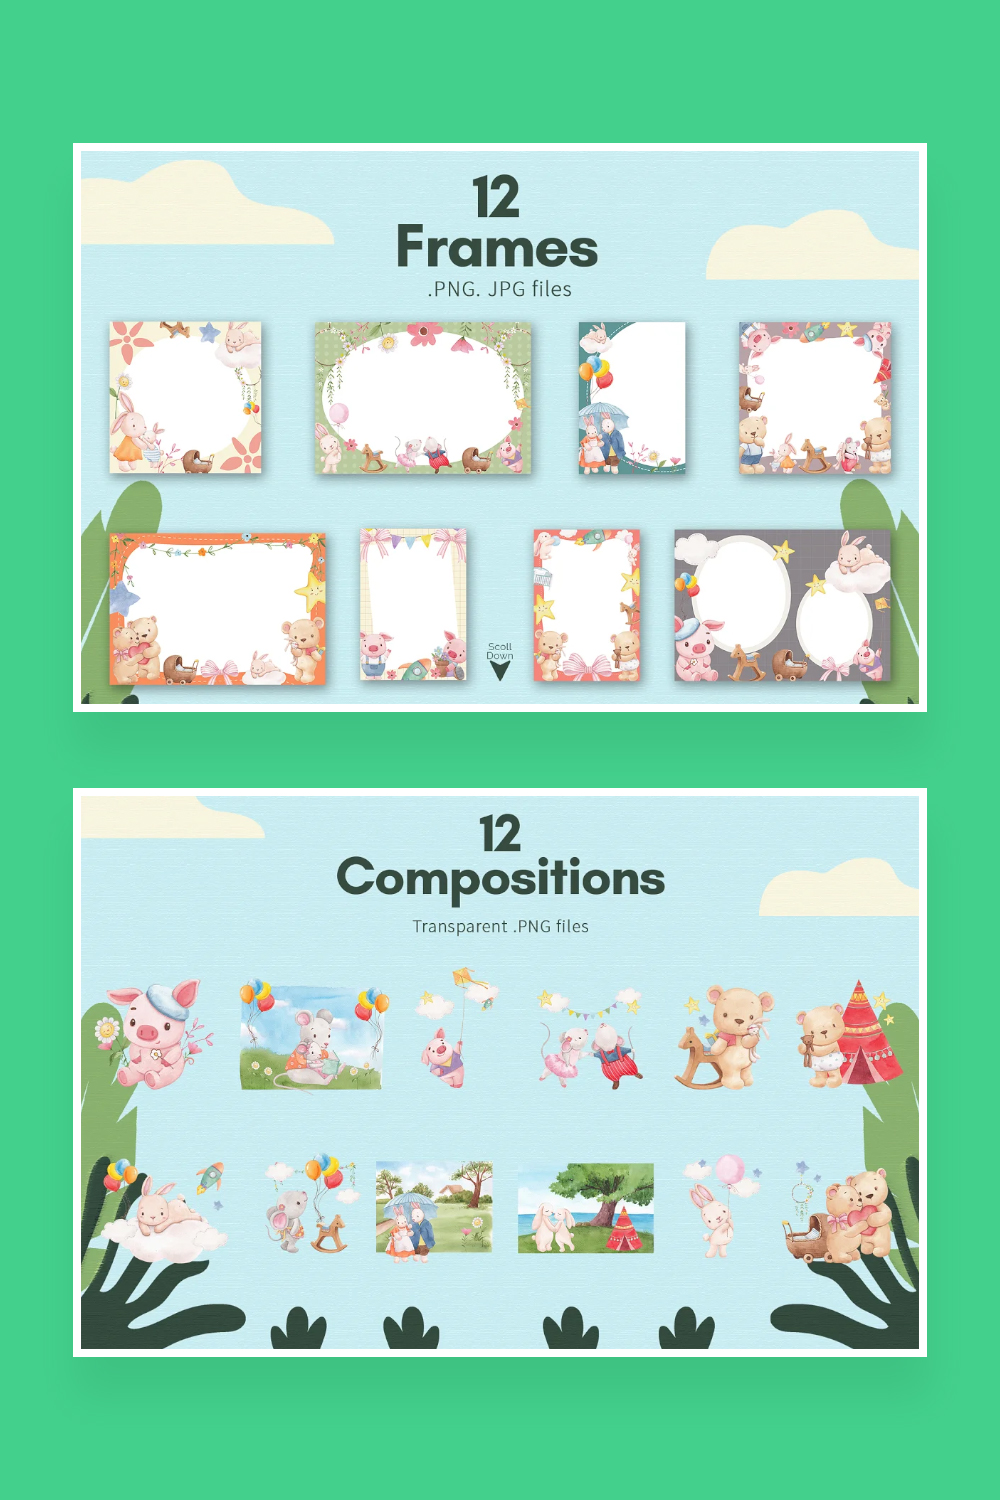 Frames and Composition of Adorable Animals Watercolor.